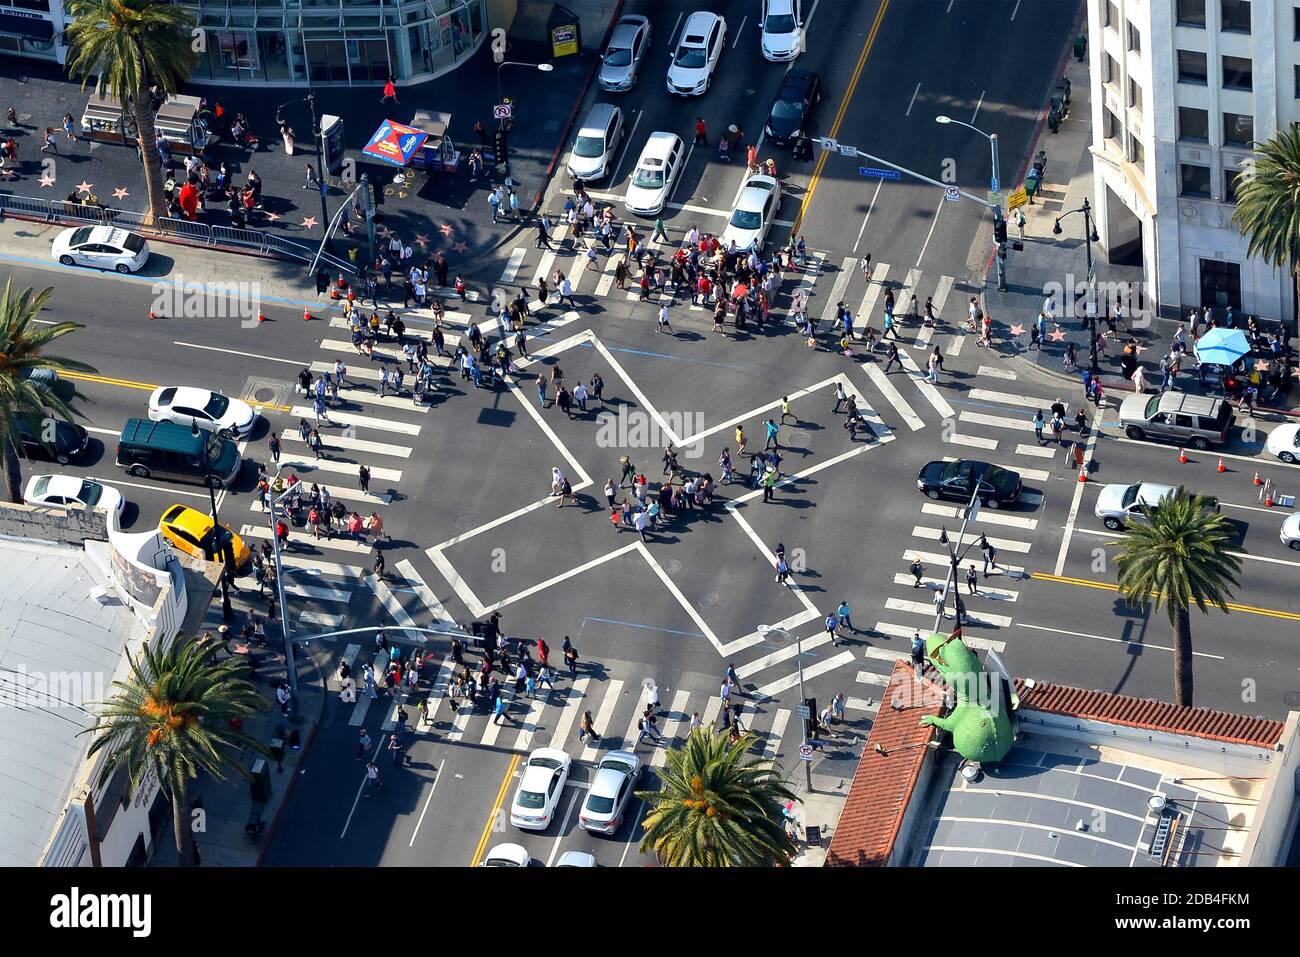 Pedestrian scramble crossing on Hollywood Boulevard and N Highland Avenue intersection aerial view. Crosswalk on Hollywood Blvd and N Highland Ave. Stock Photo